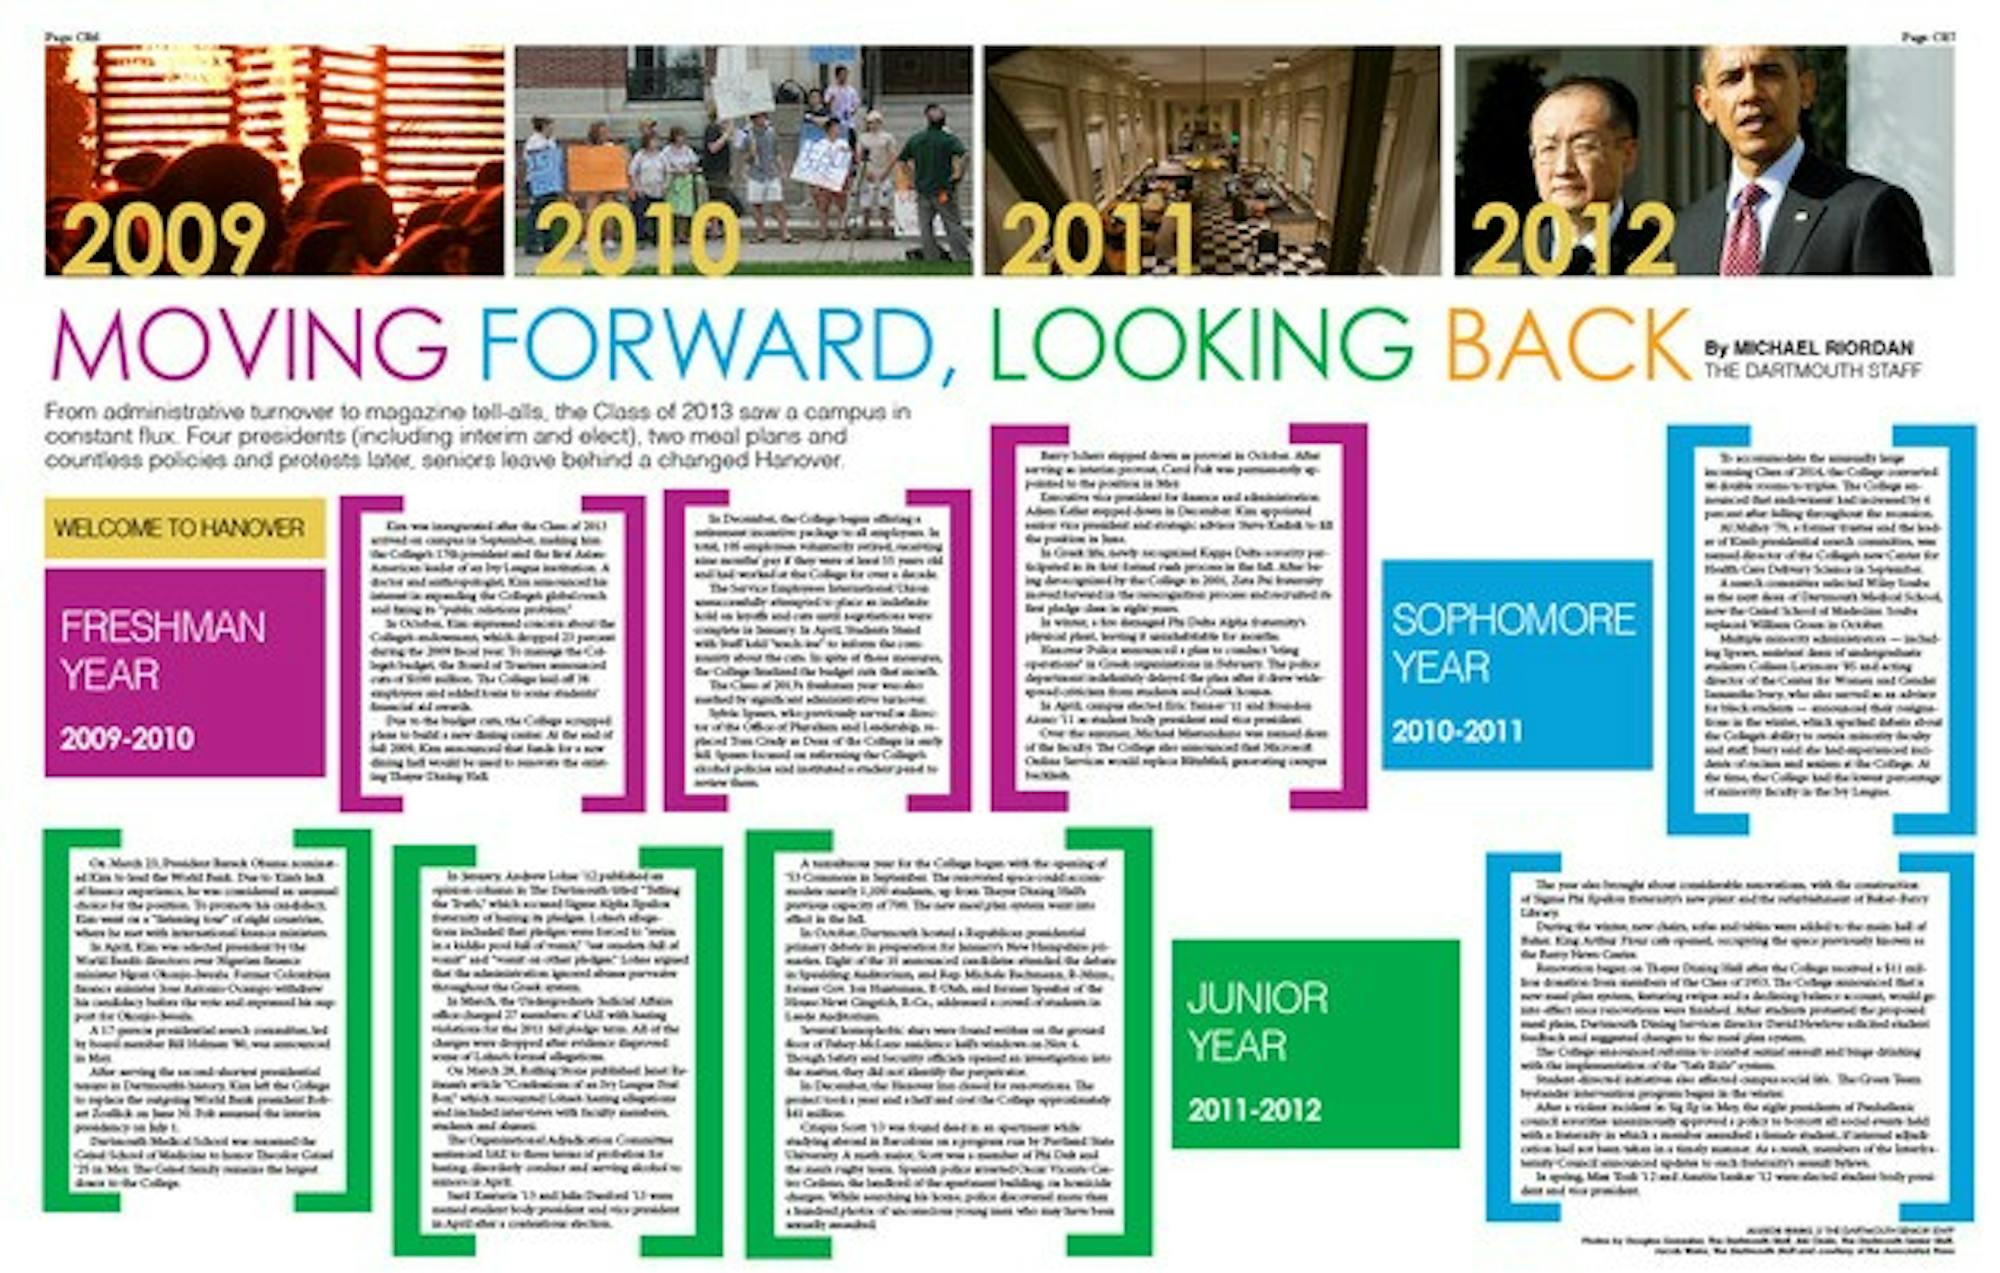 From administrative turnover to magazine tell-alls, the Class of 2013 saw a campus in constant flux. Four presidents (including interim and elect), two meal plans and countless policies and protests later, seniors leave behind a changed Hanover.